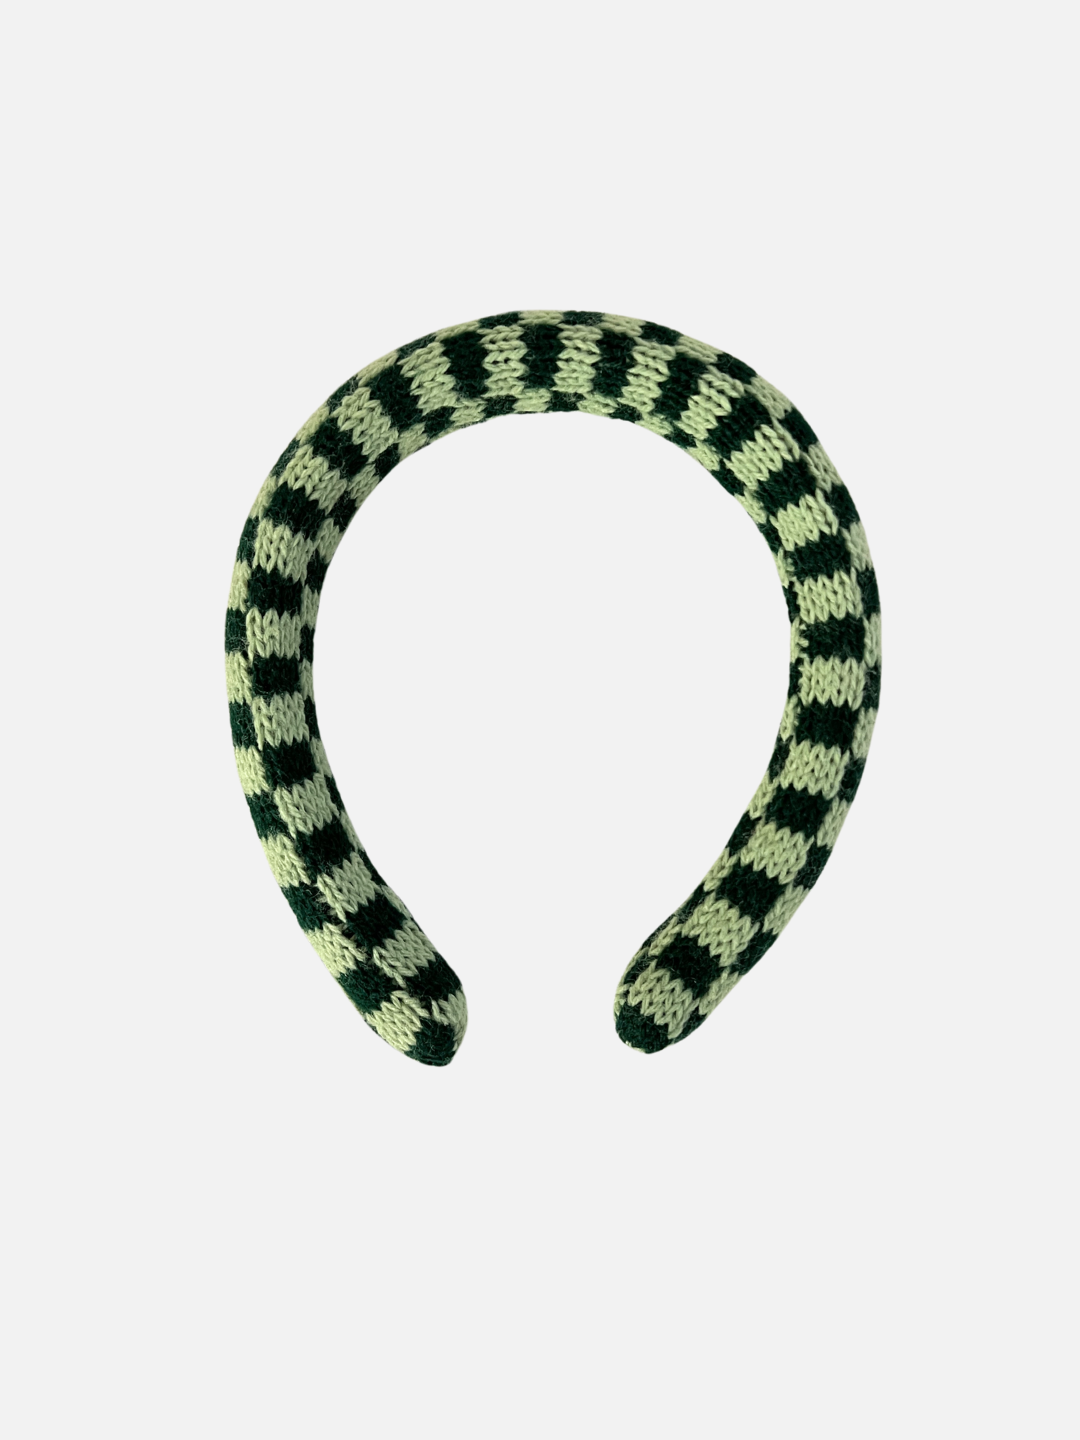 A kids' knitted headband in a forrest green and light green check